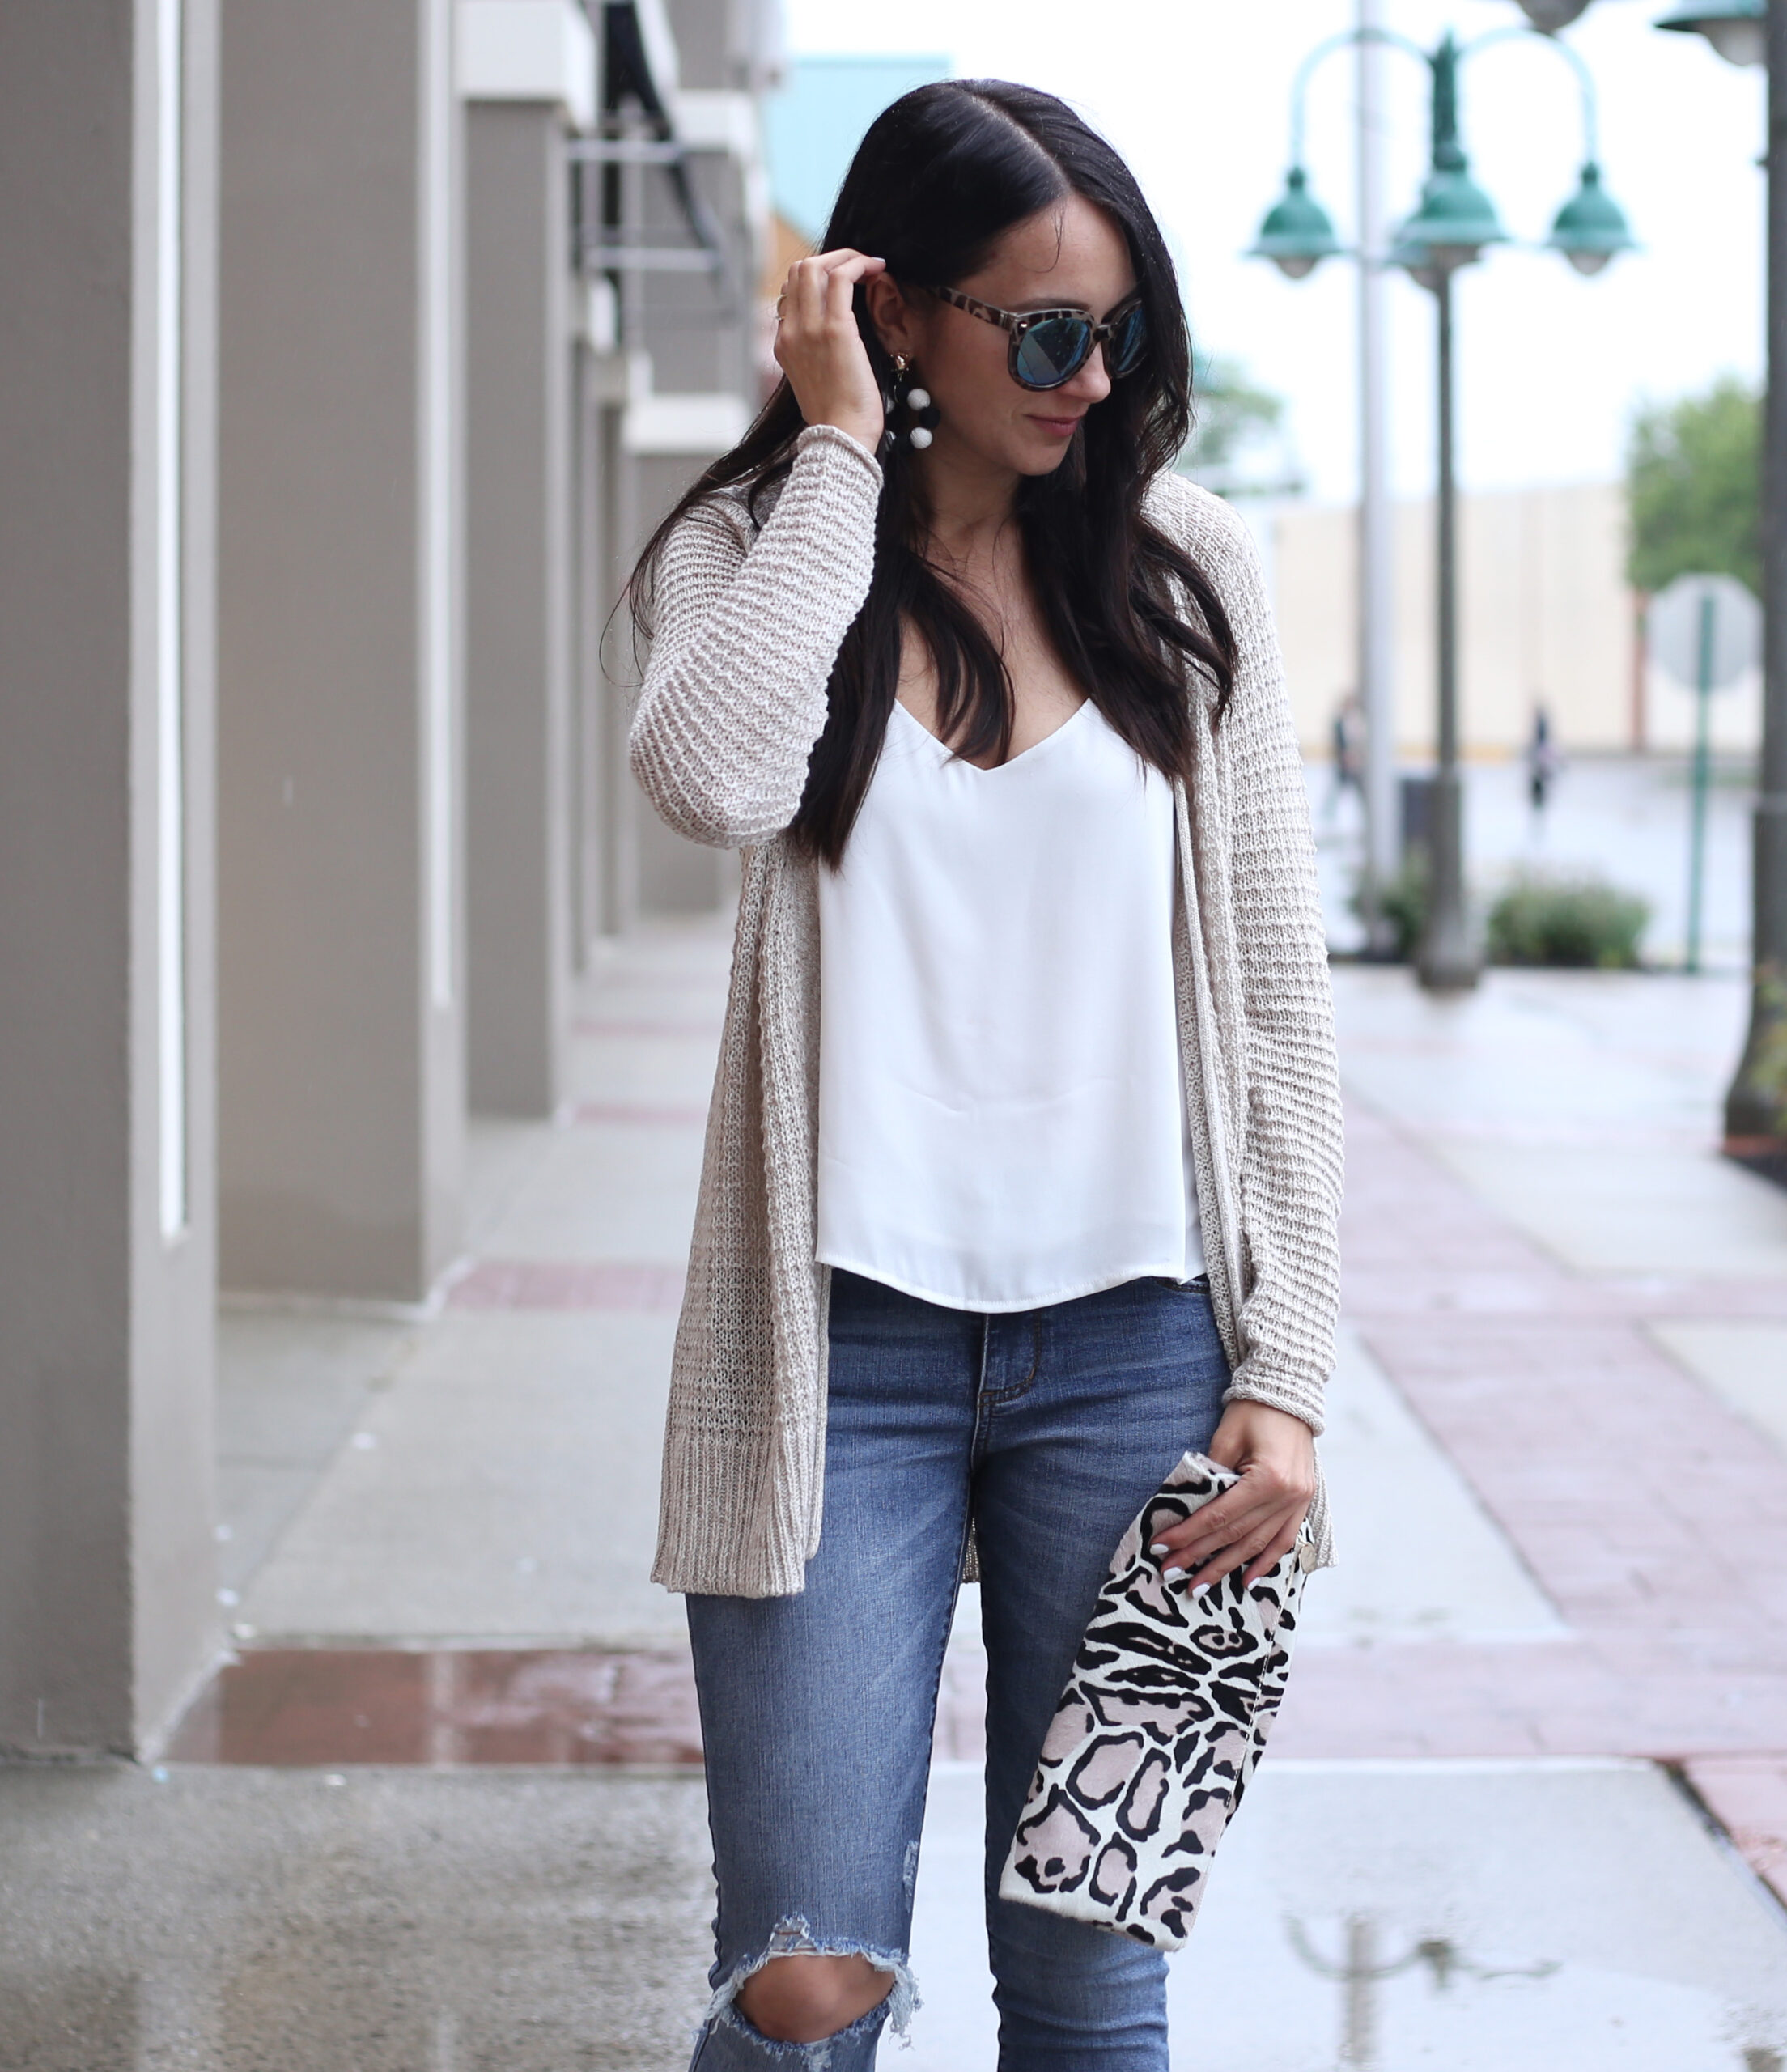 Anna Monteiro of blushing rose style wearing BP sunglasses from Nordstrom